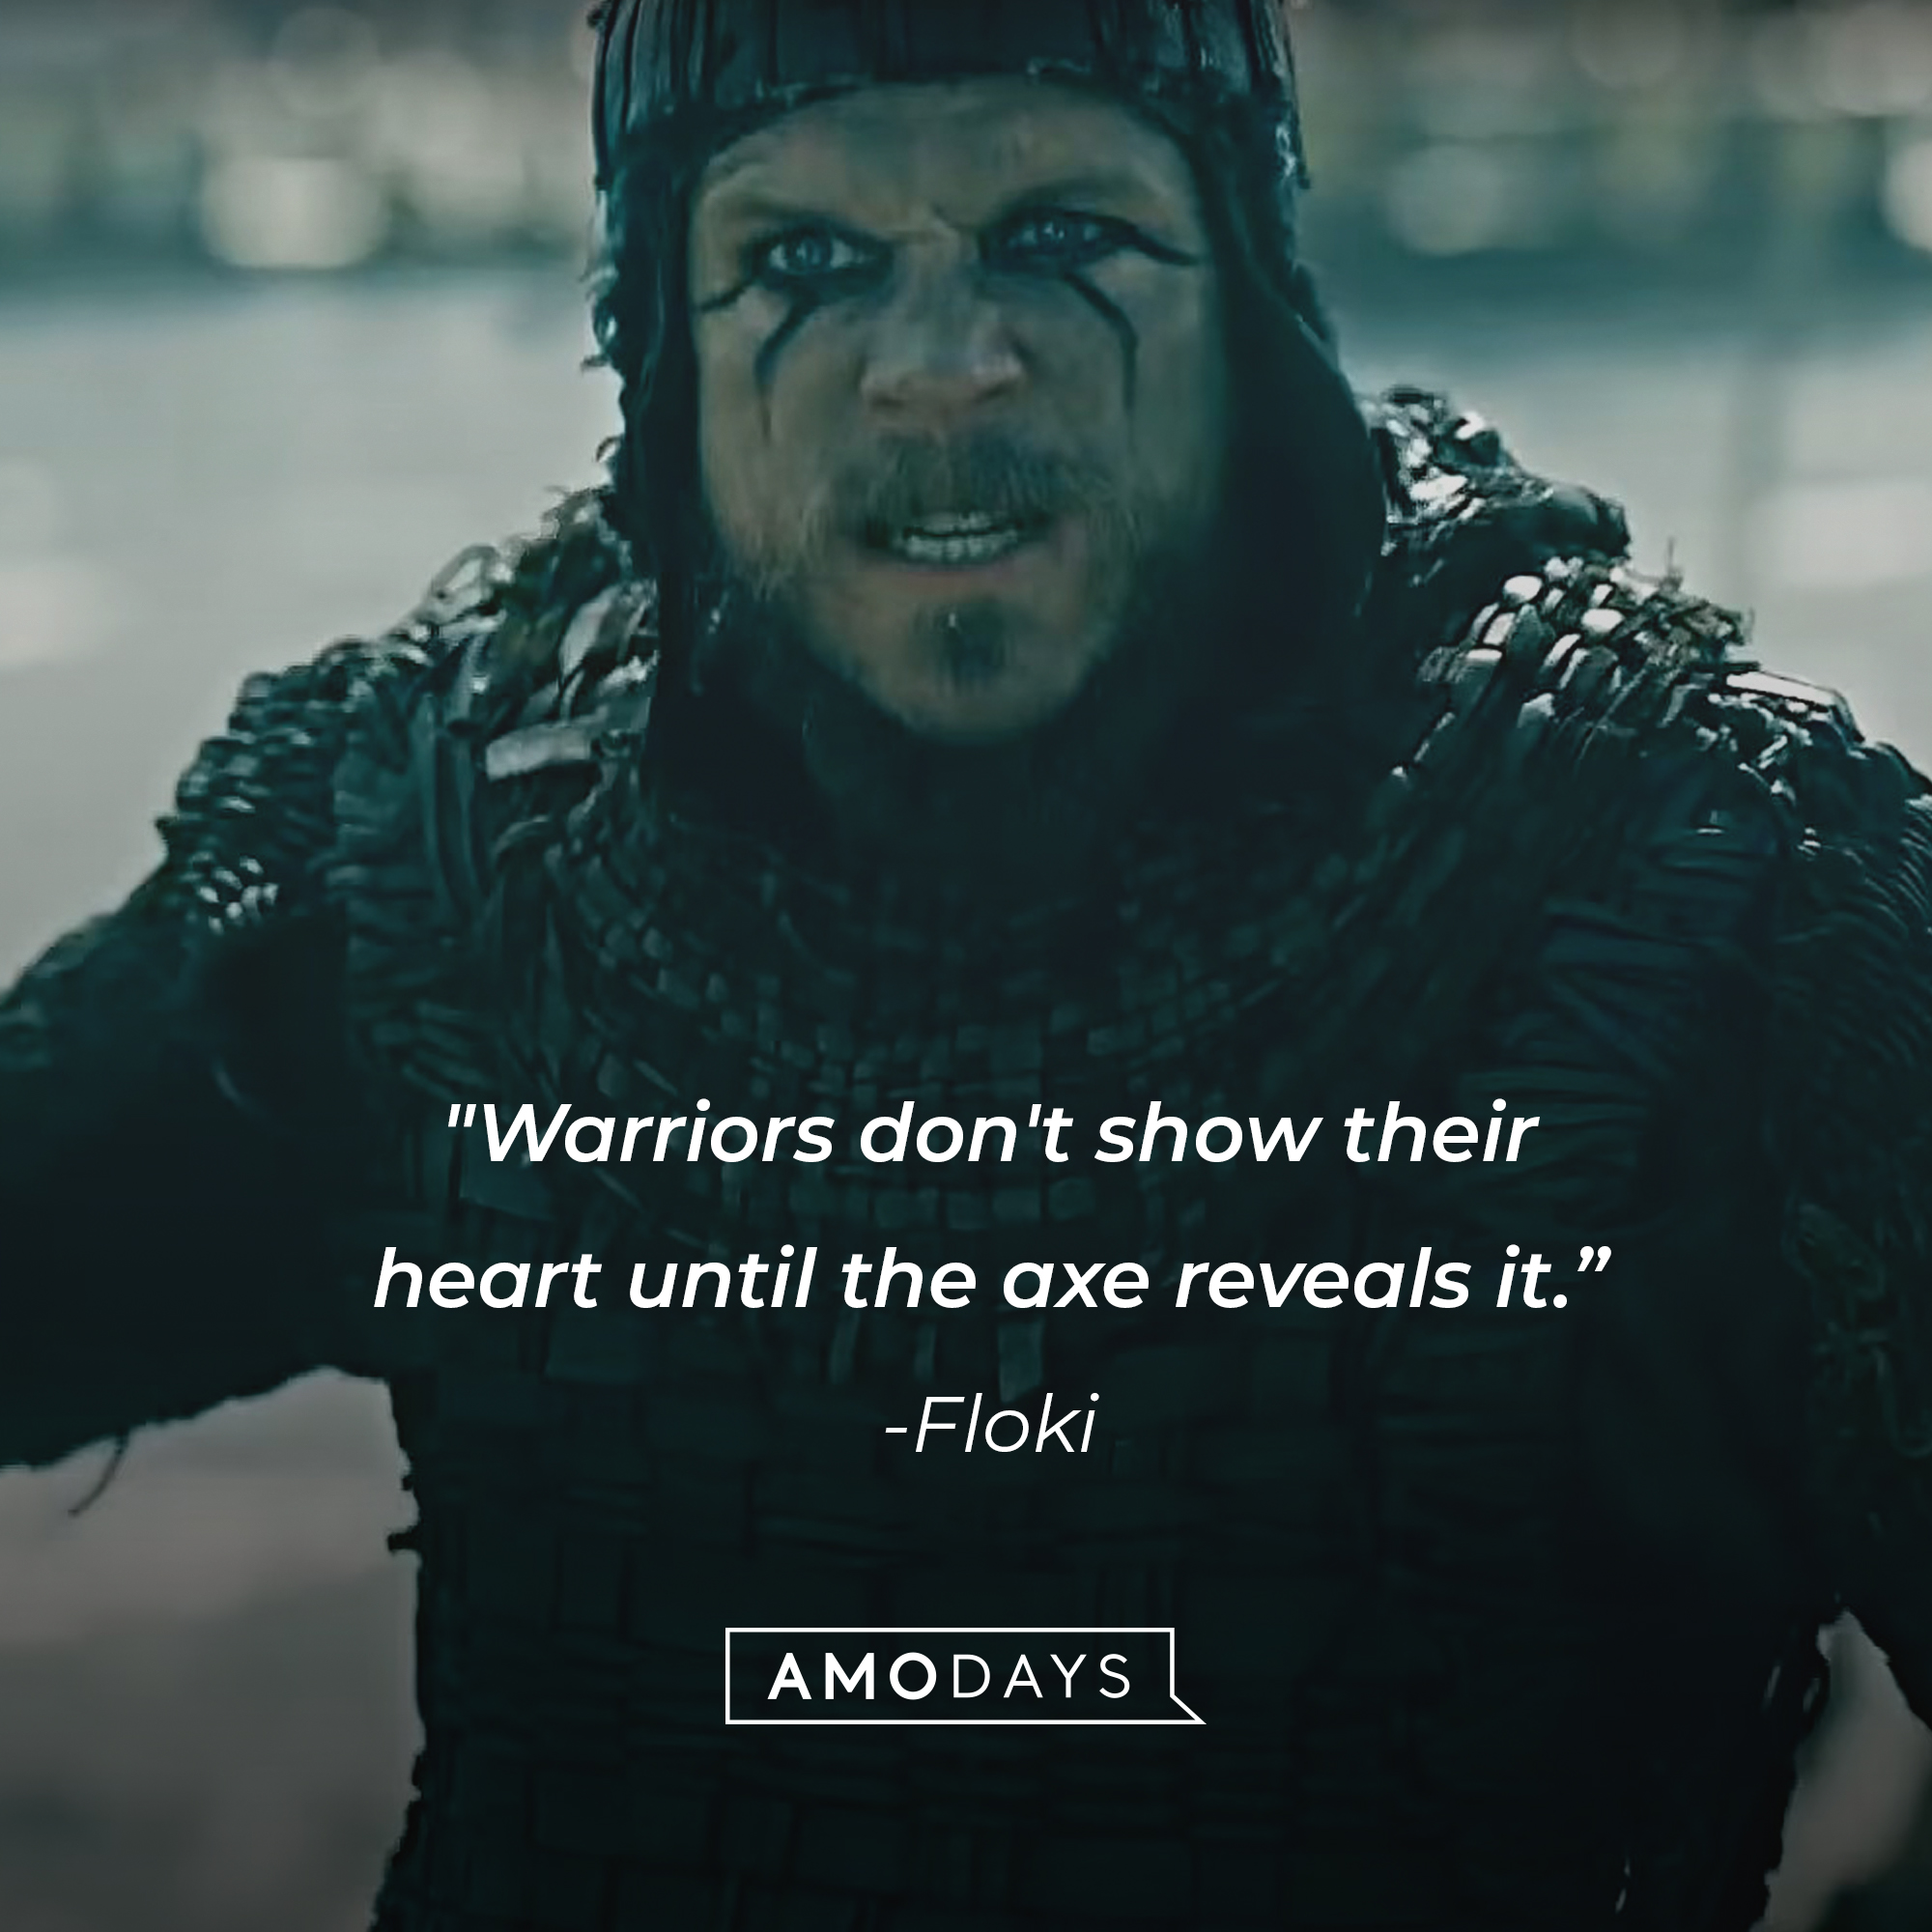 An image of Floki with his quote: "Warriors don't show their heart until the axe reveals it.” | Source: facebook.com/Vikings